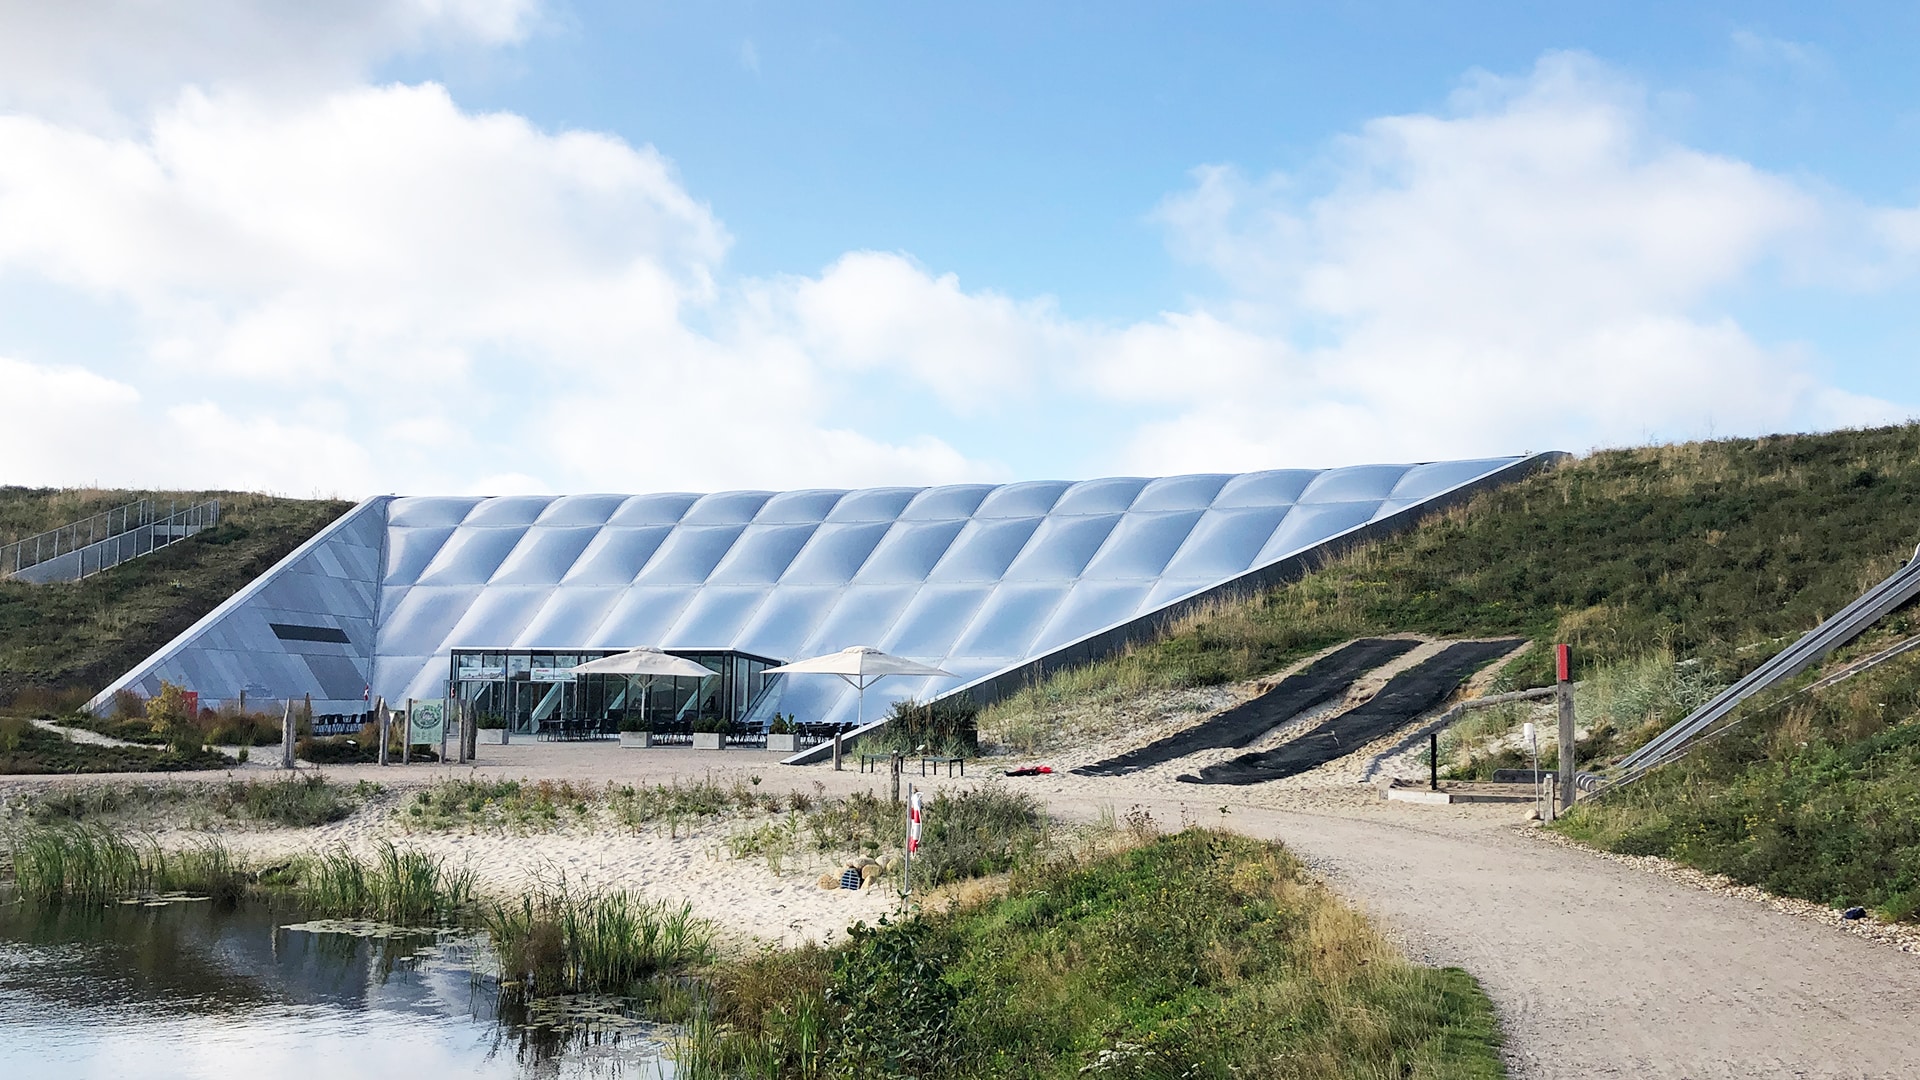 Denmark's Naturkraft adventure park creates an unforgettable learning environment for all visitors - with our Texlon® ETFE building envelope.